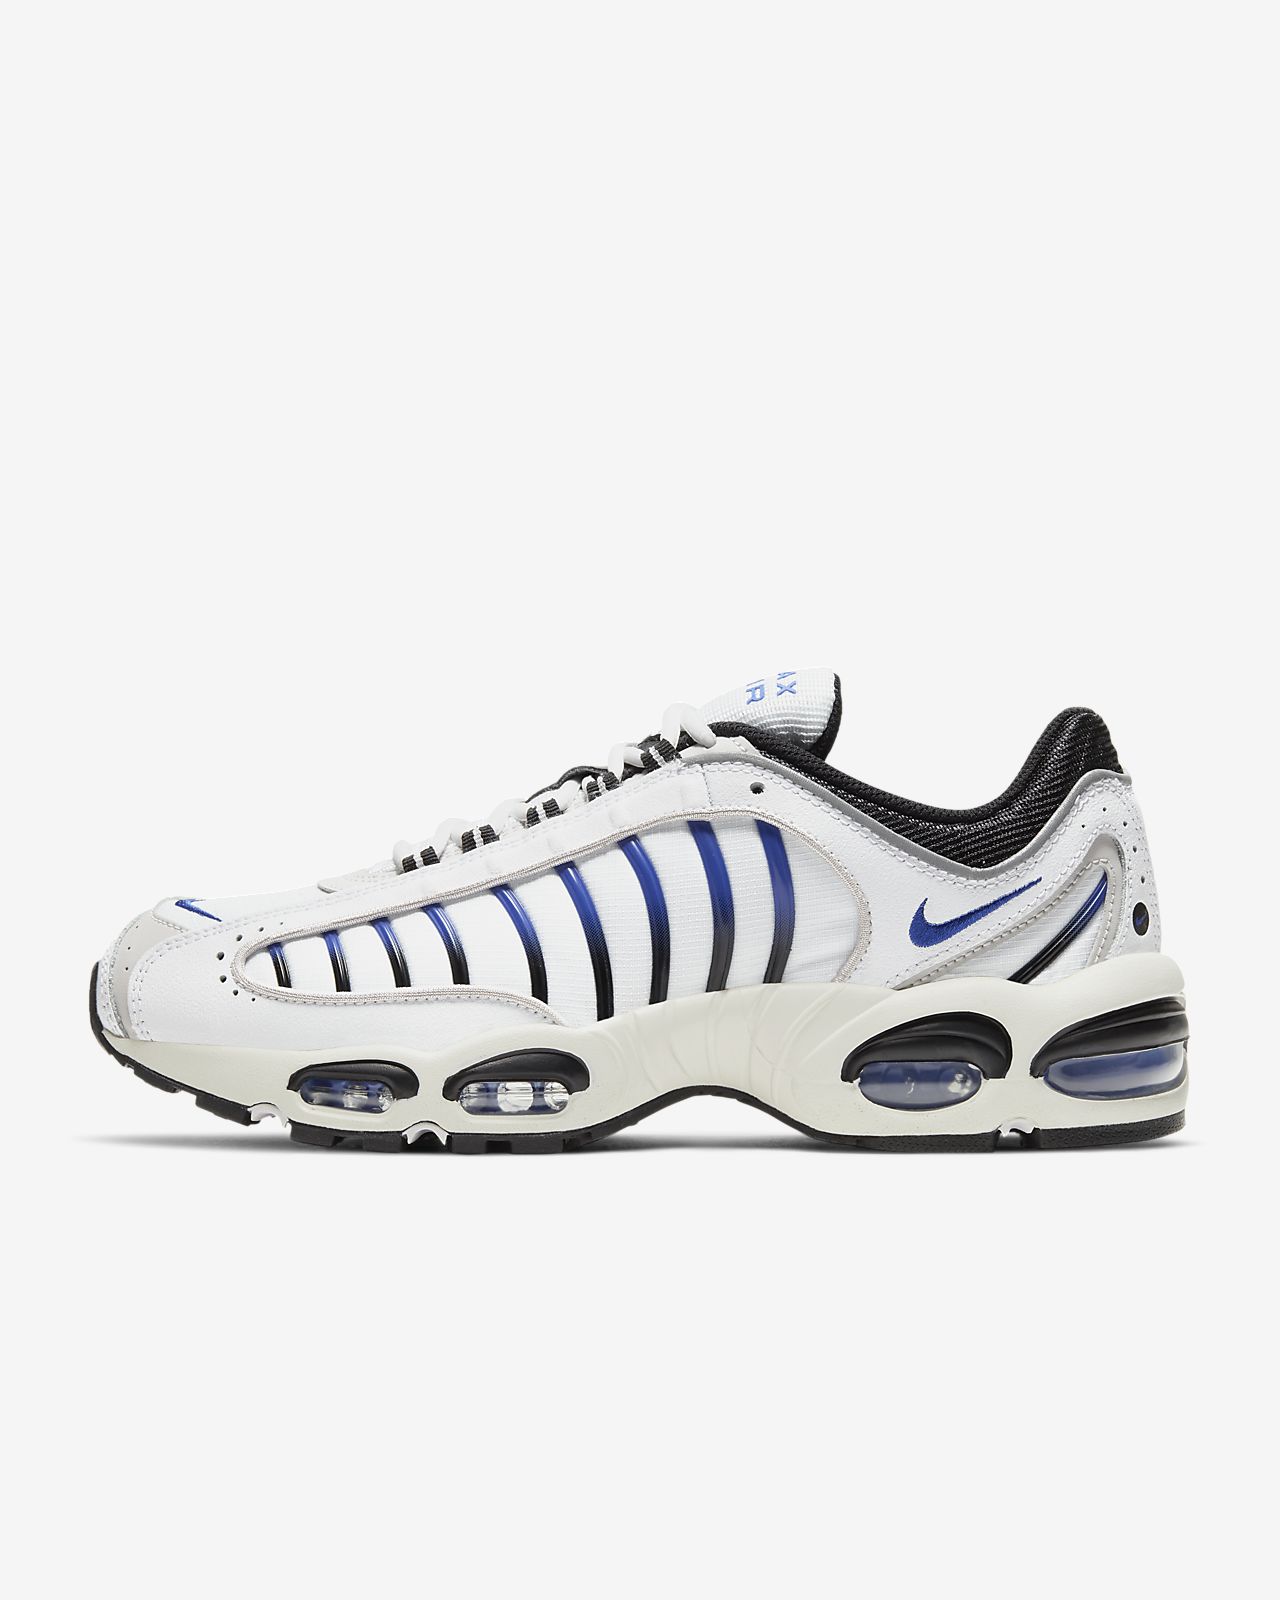 nike air max tailwind iv men's shoes